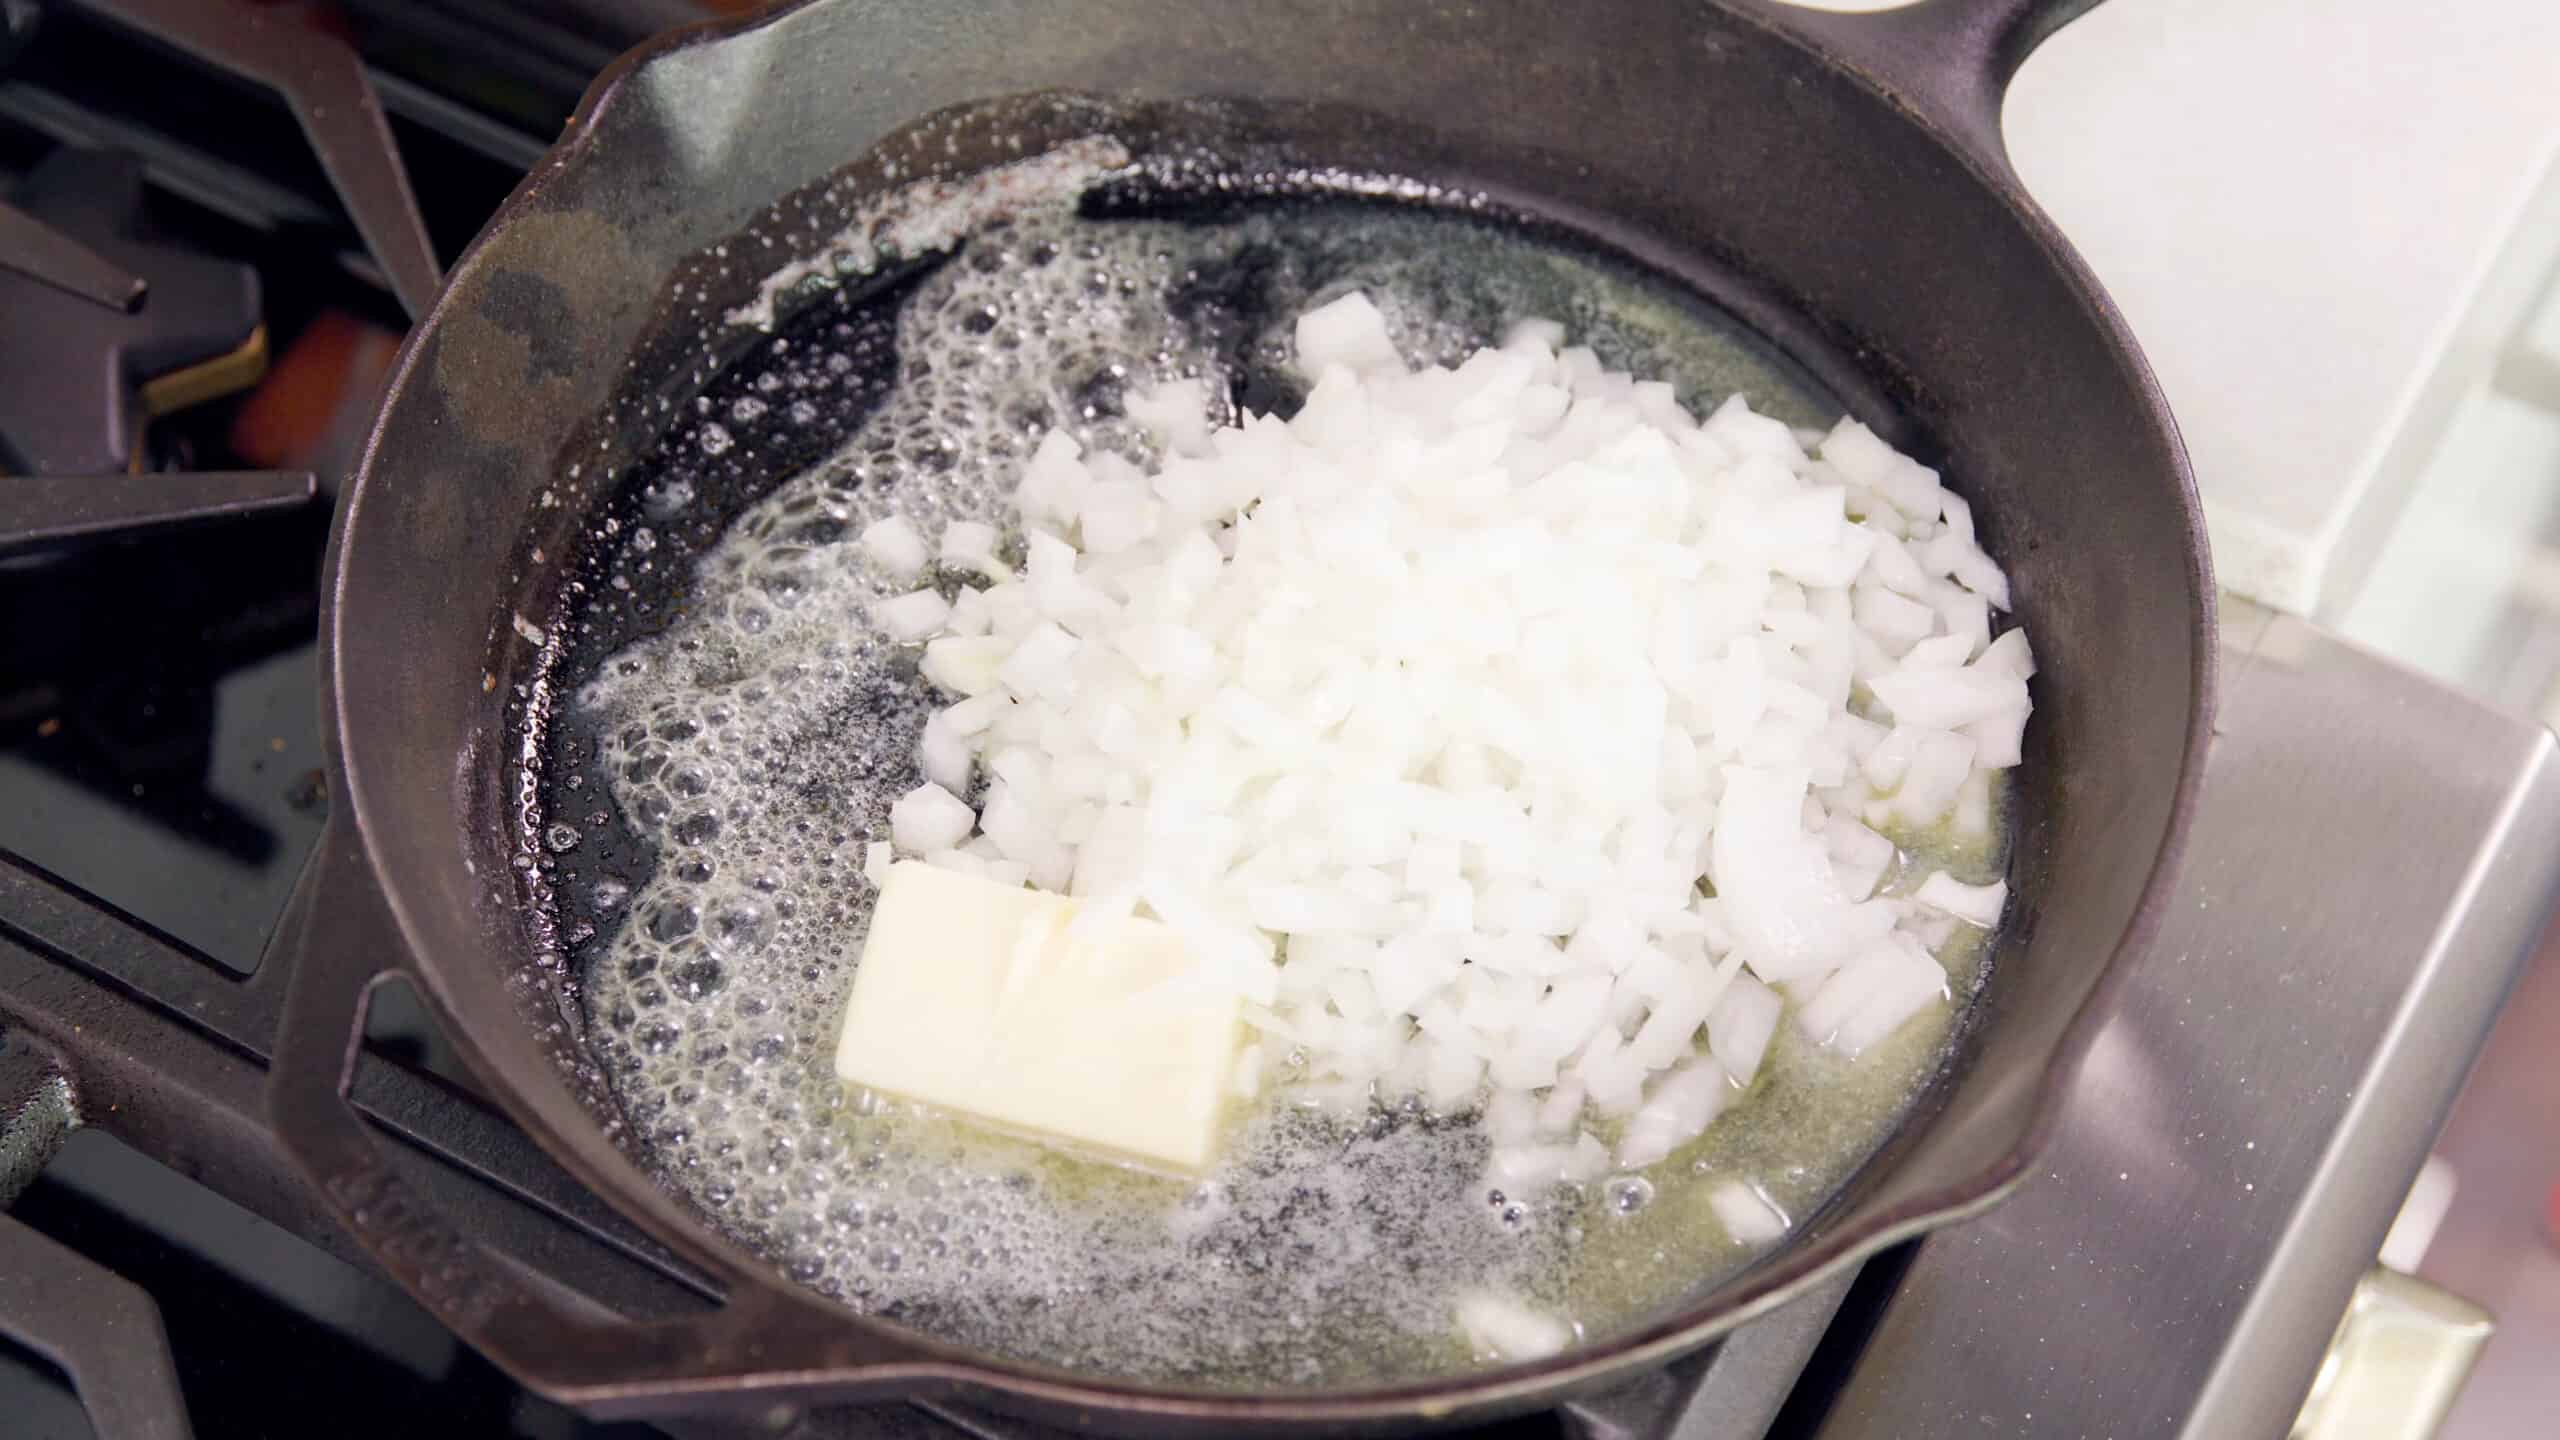 Angled view of a cast iron skillet with white onions and melting butter sizzling on the stovetop.